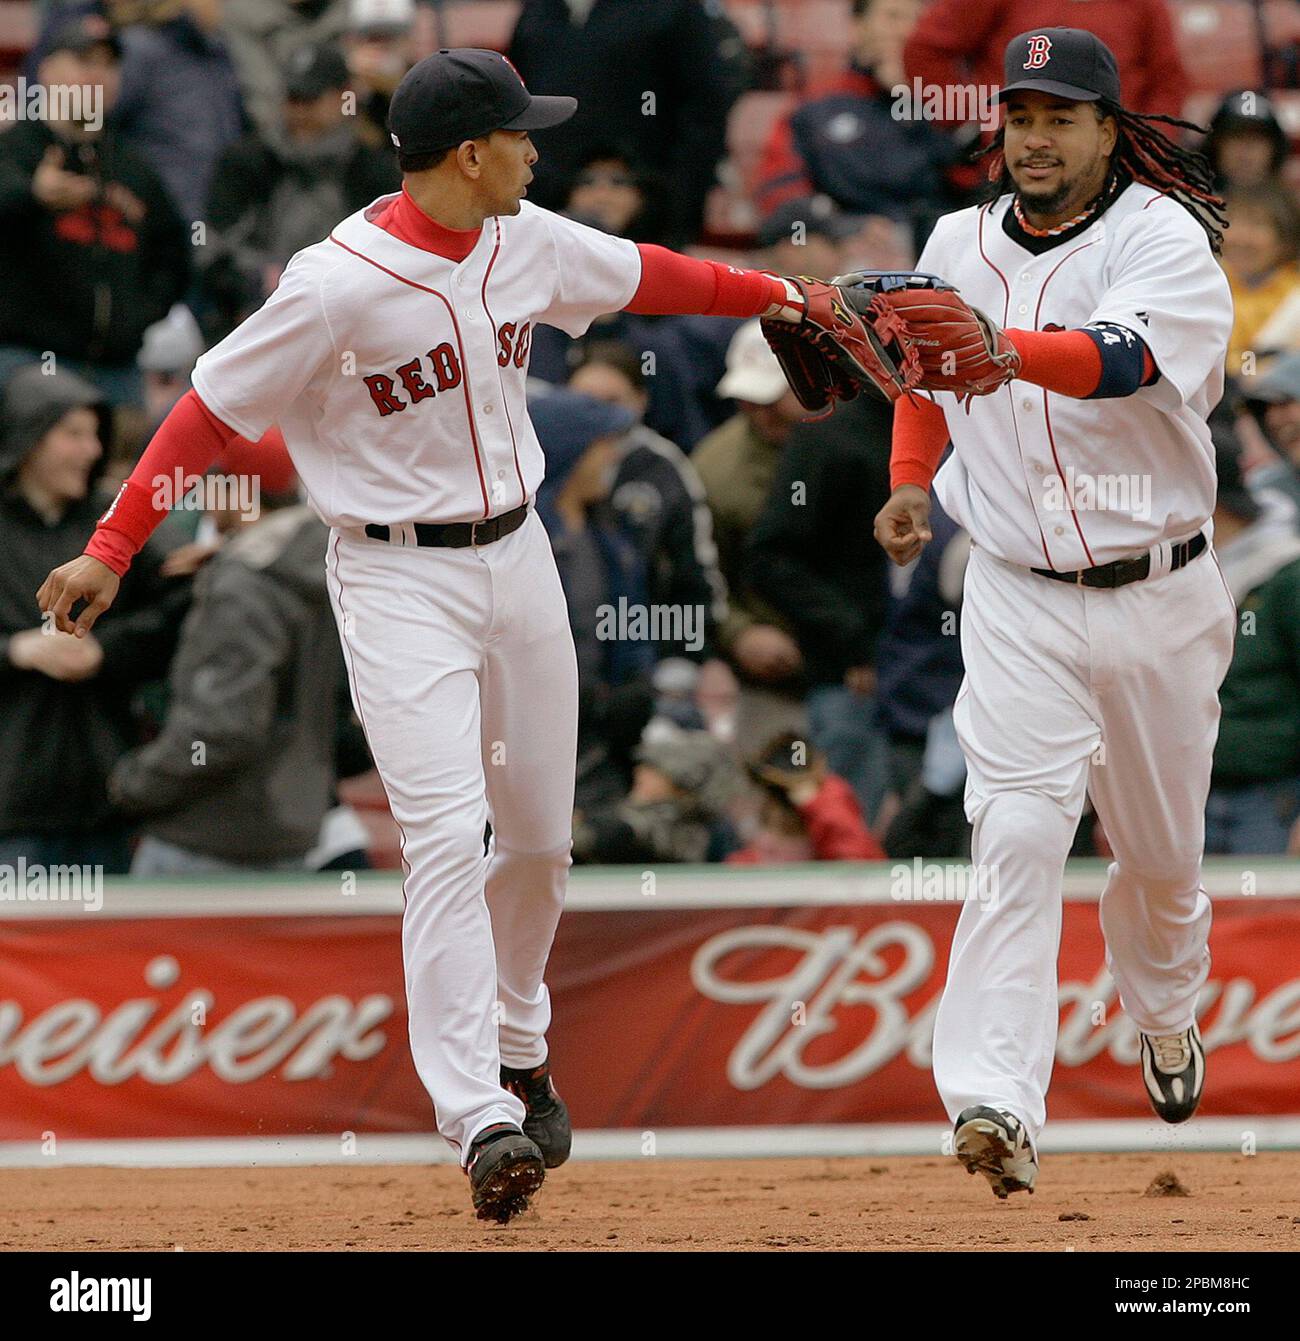 Boston Red Sox left fielder Manny Ramirez, right, and shortstop Julio Lugo  touch gloves after Ramirez caught a fly ball to end the second inning  during a baseball game against the Los